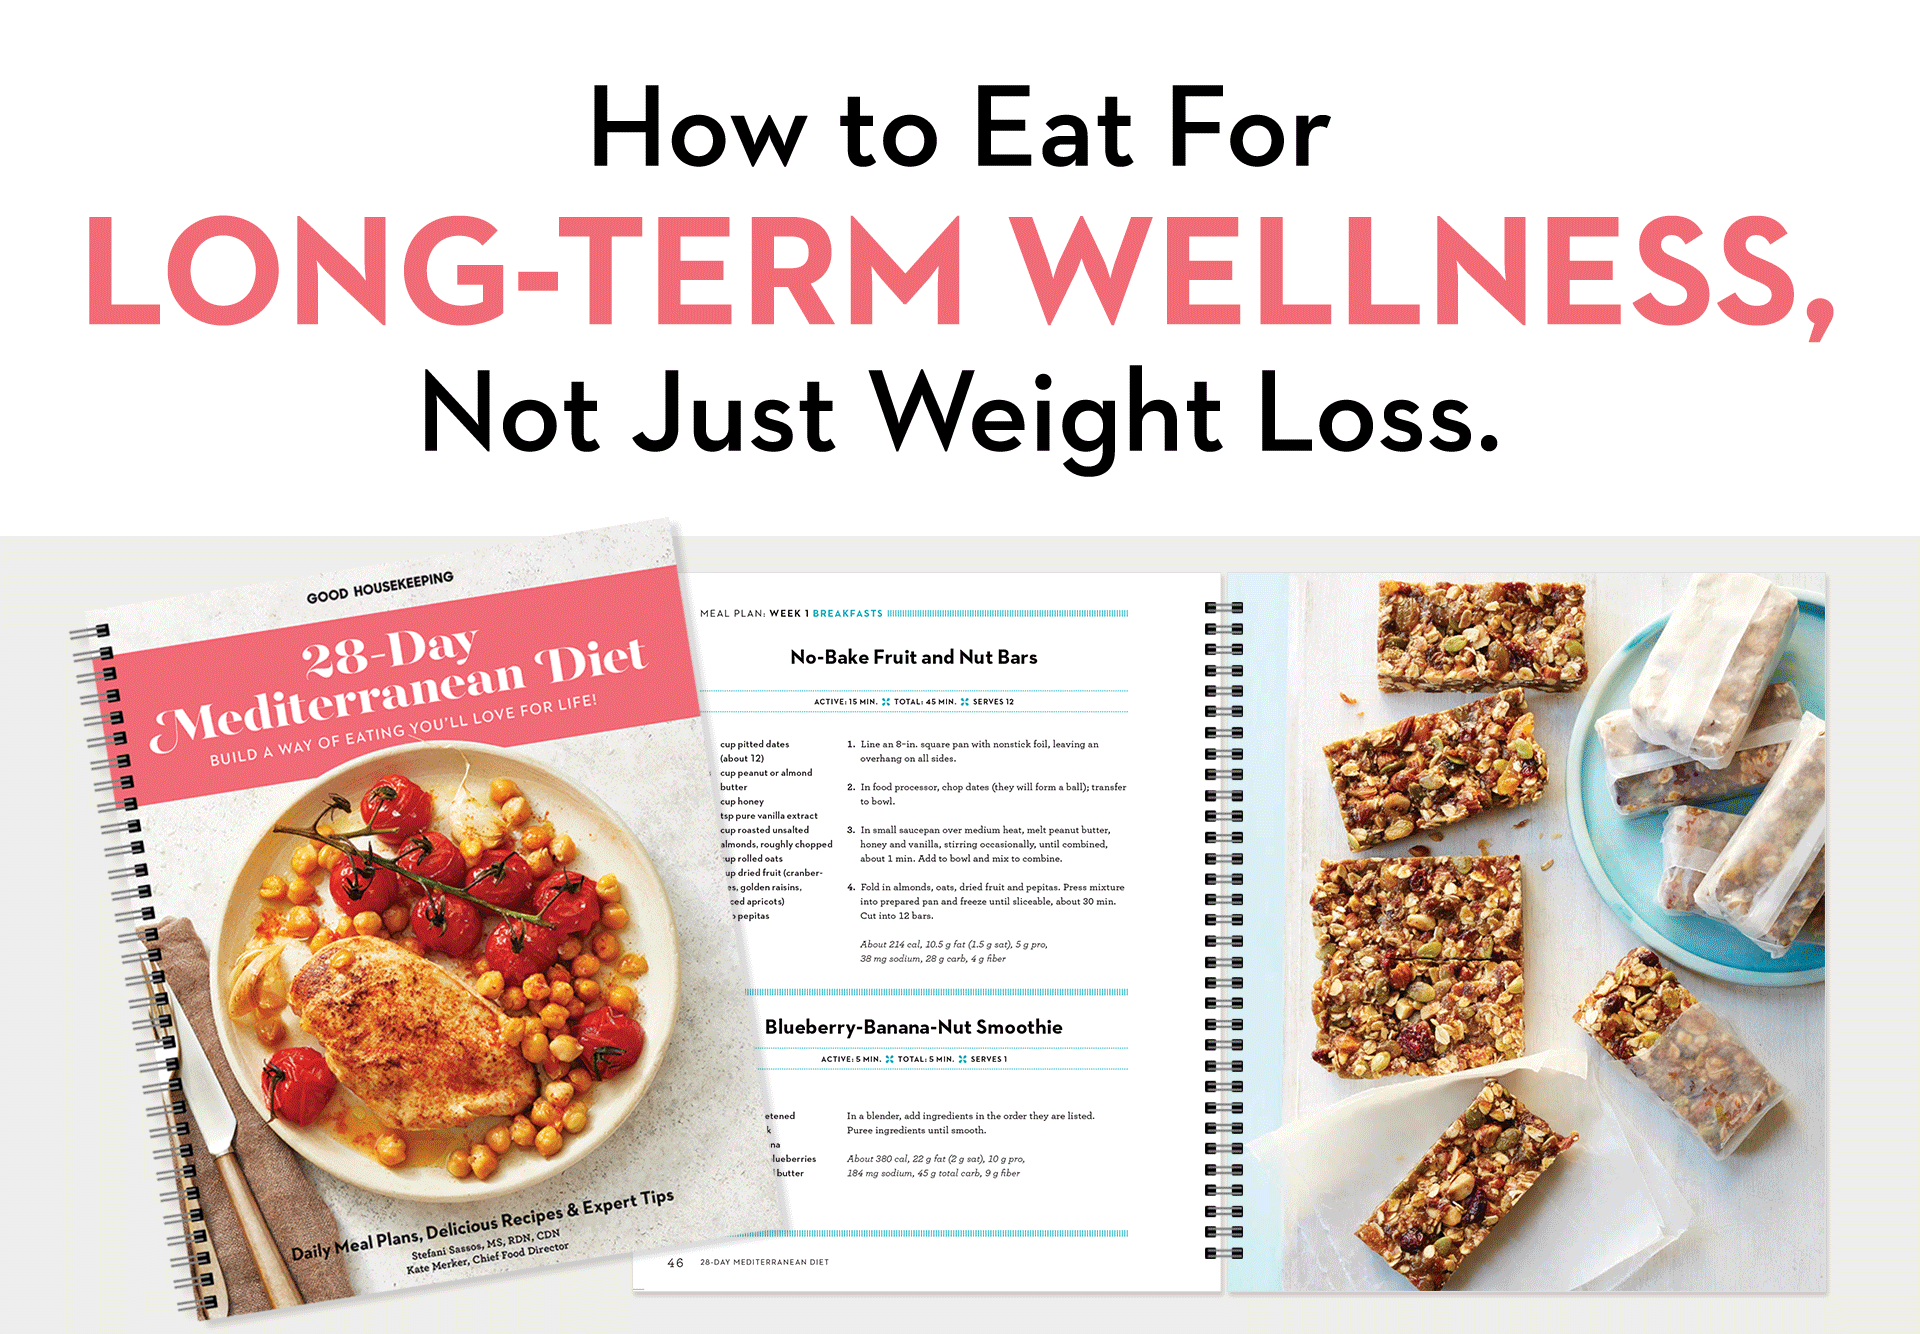 how to eat for long term wellness, not just weight loss